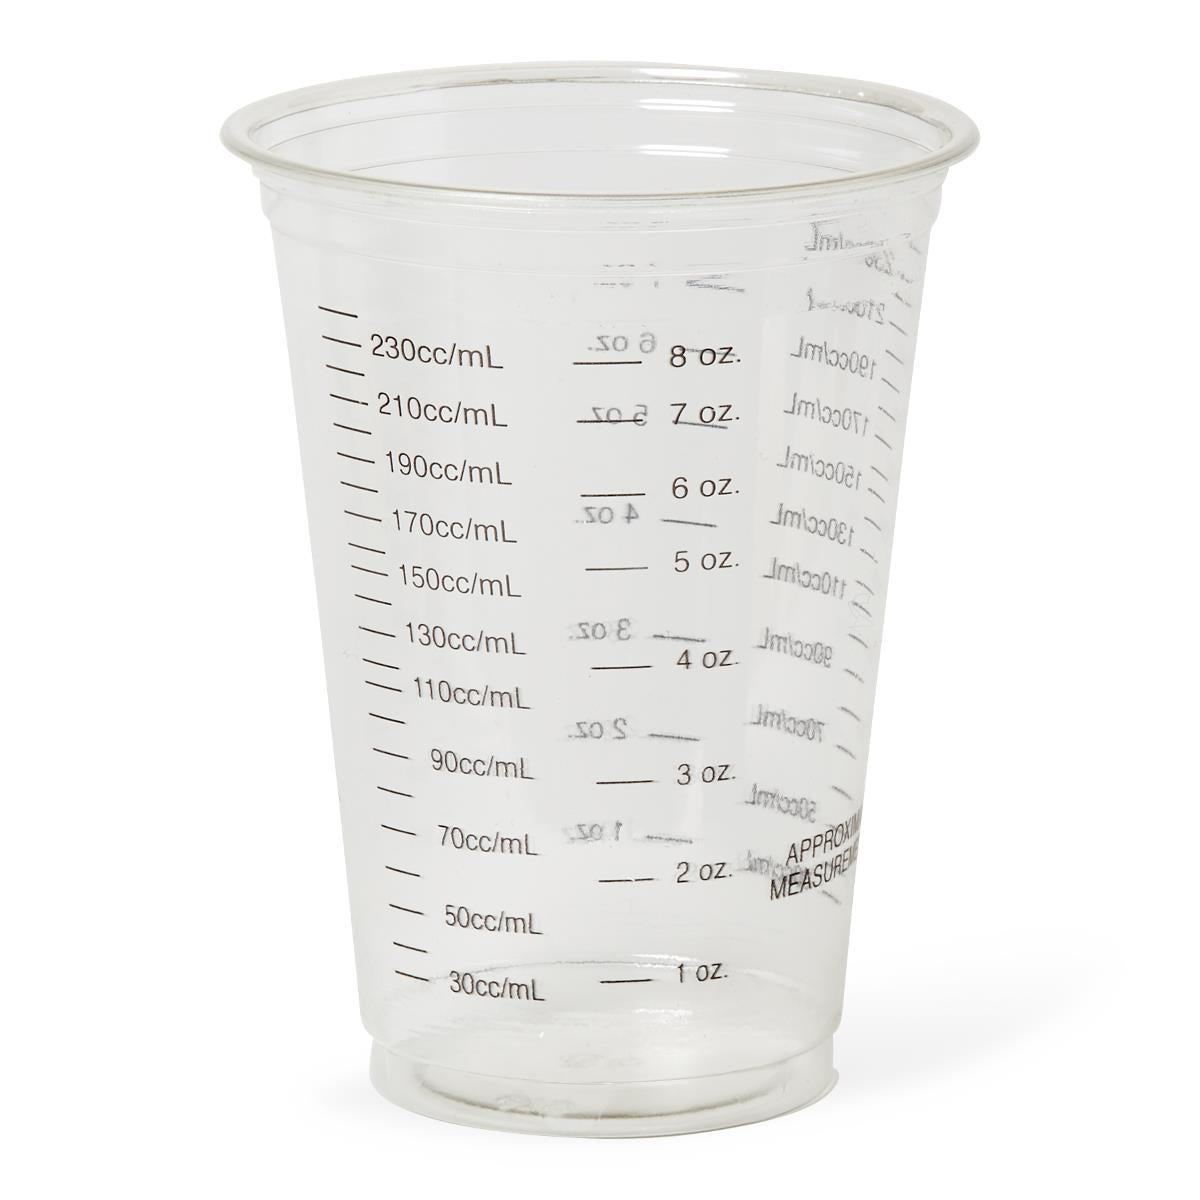 Medline Disposable Graduated Cold Plastic Drinking Cups - 10 oz, Clear with Black Graduations Each